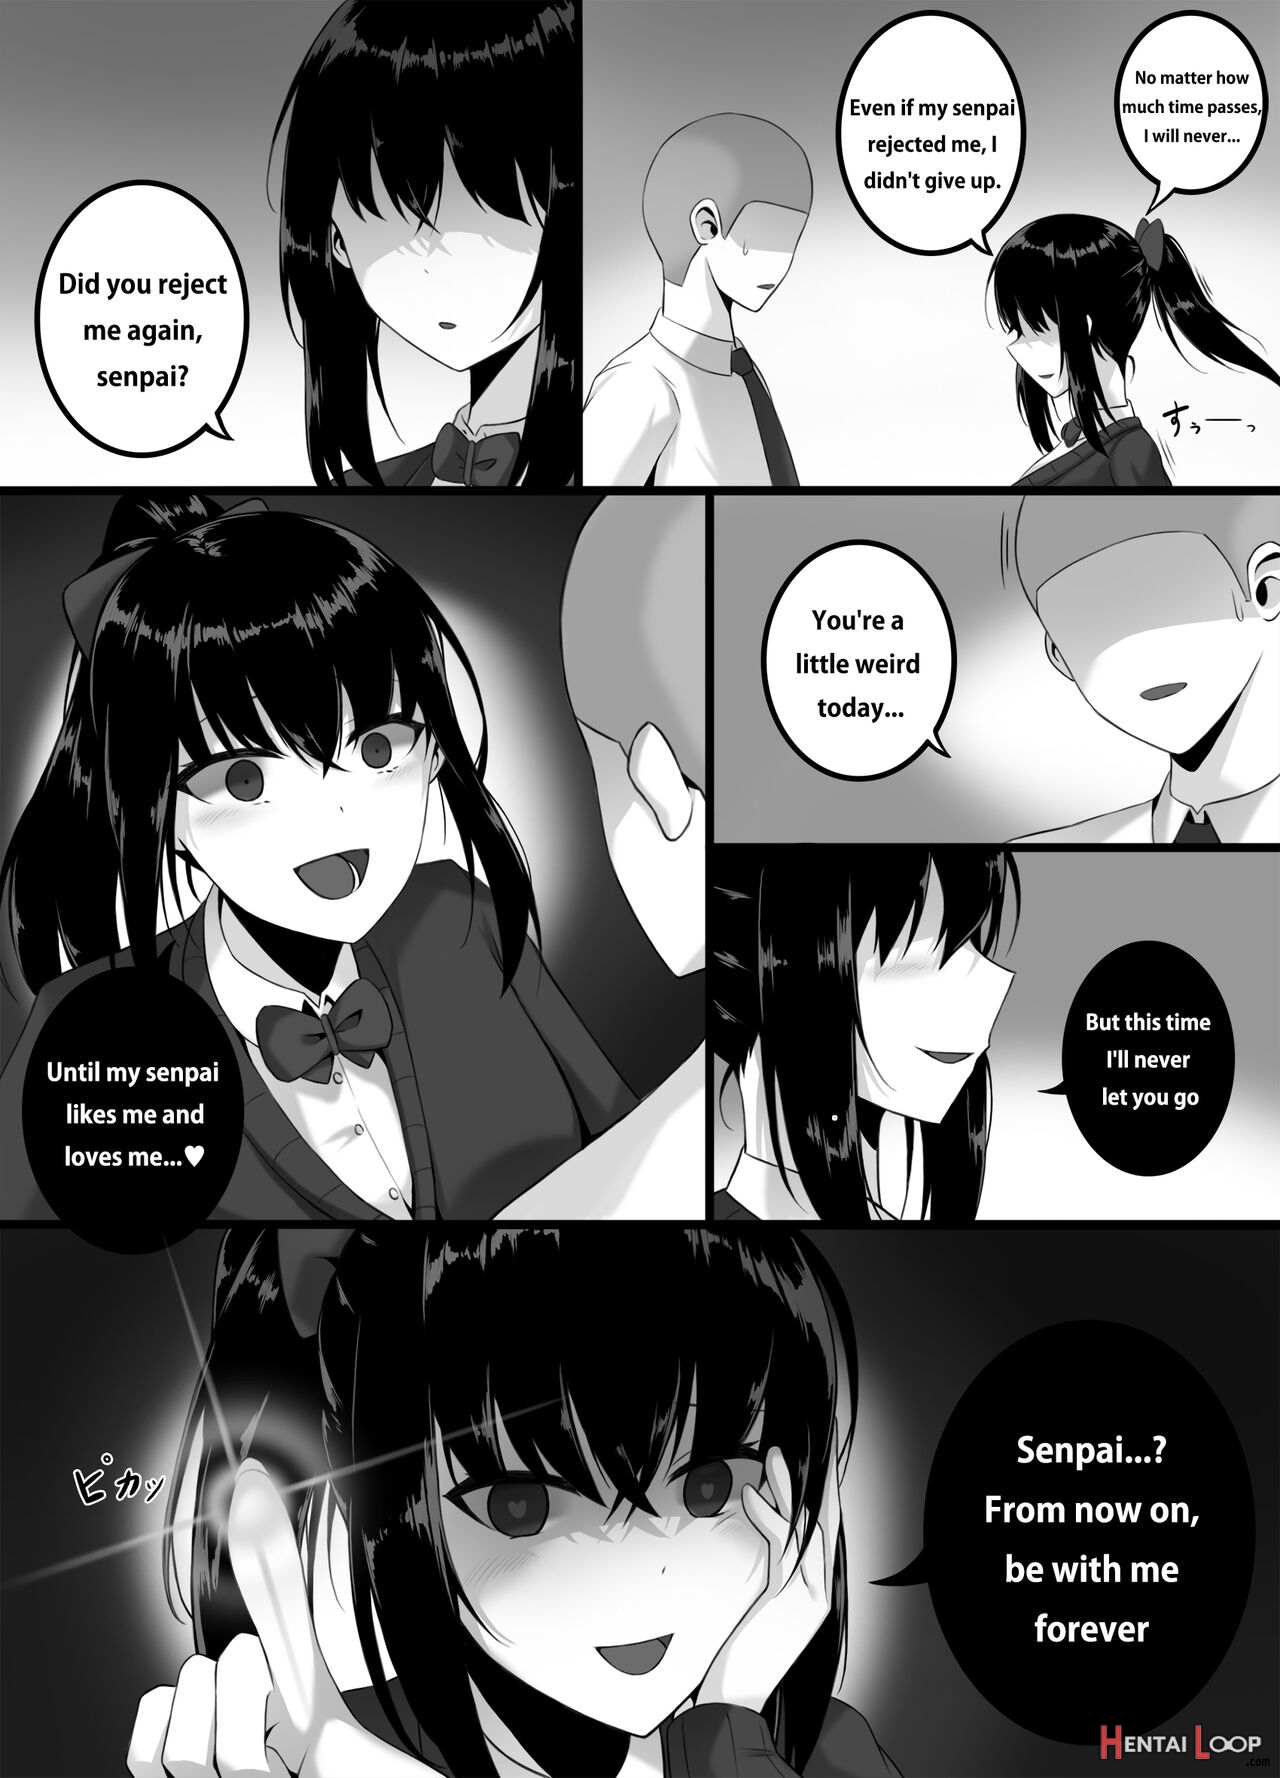 Yandere Girl page 2